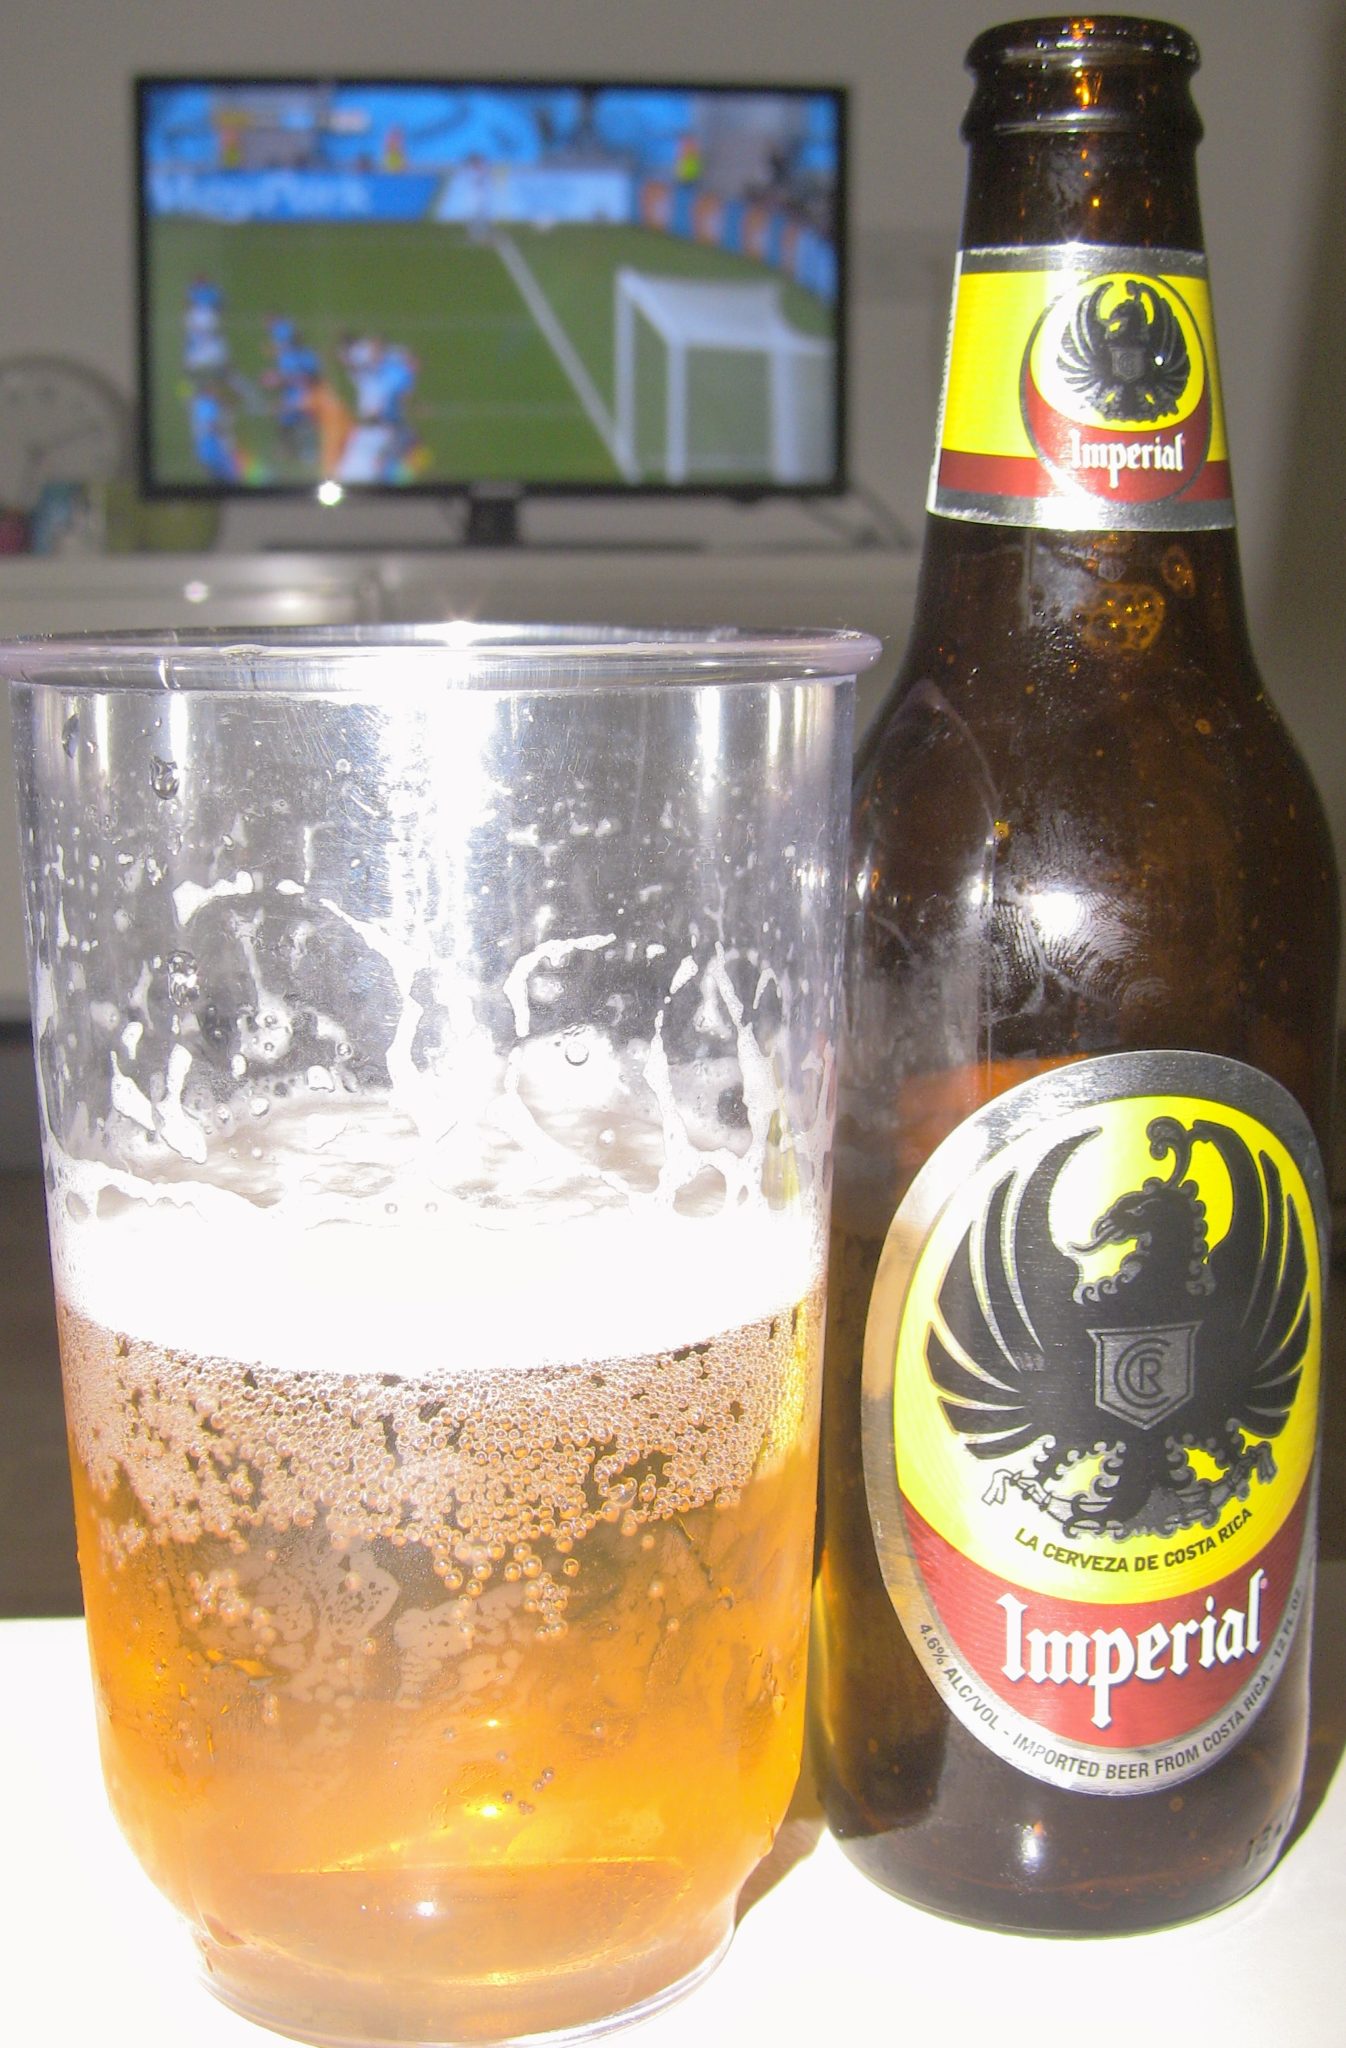 Imperial Beer, Little Eagle. A Pale Lager from Costa Rica